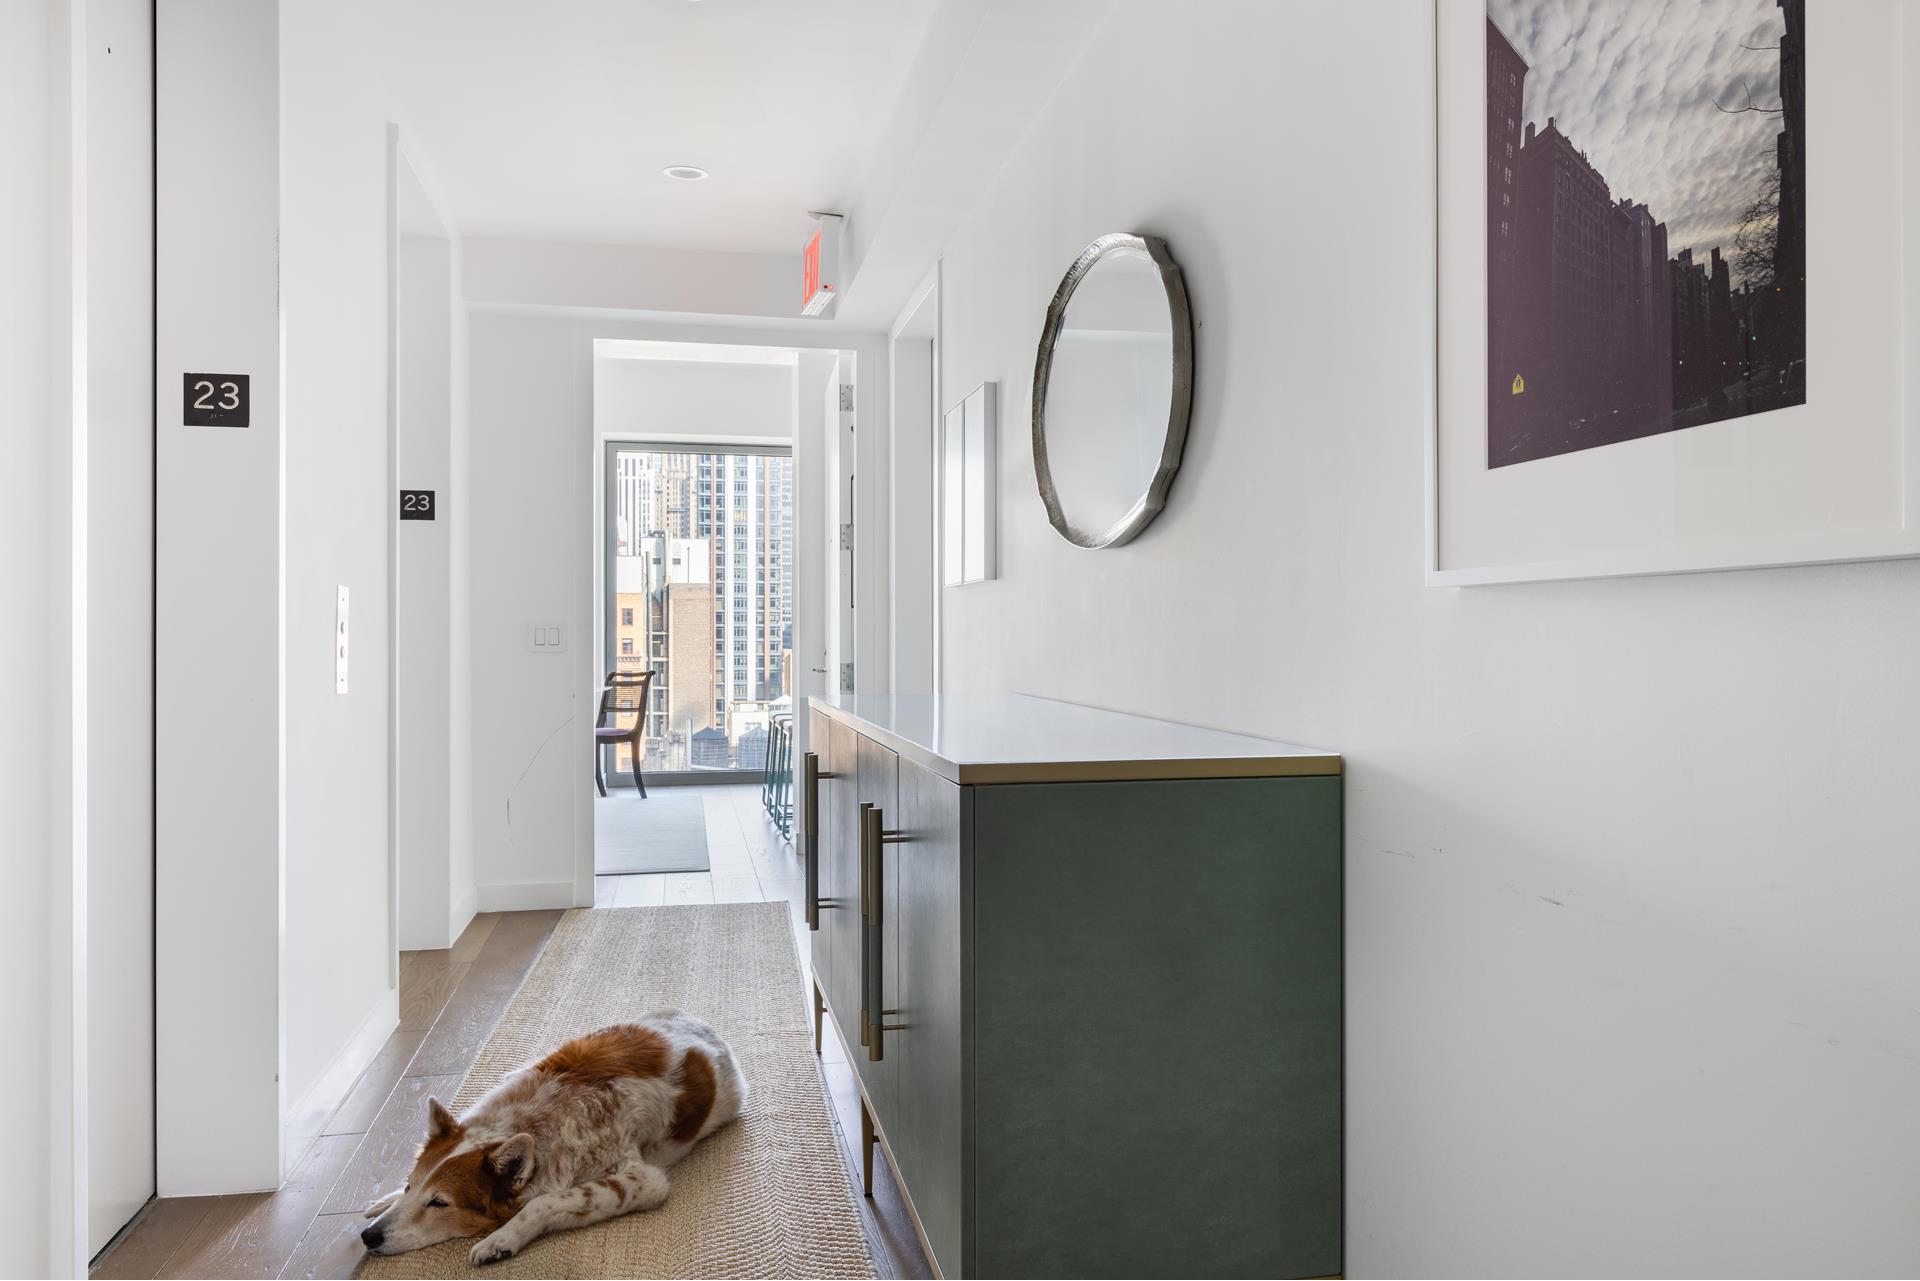 30 East 31st Street 23, Nomad, Downtown, NYC - 2 Bedrooms  
2.5 Bathrooms  
4 Rooms - 